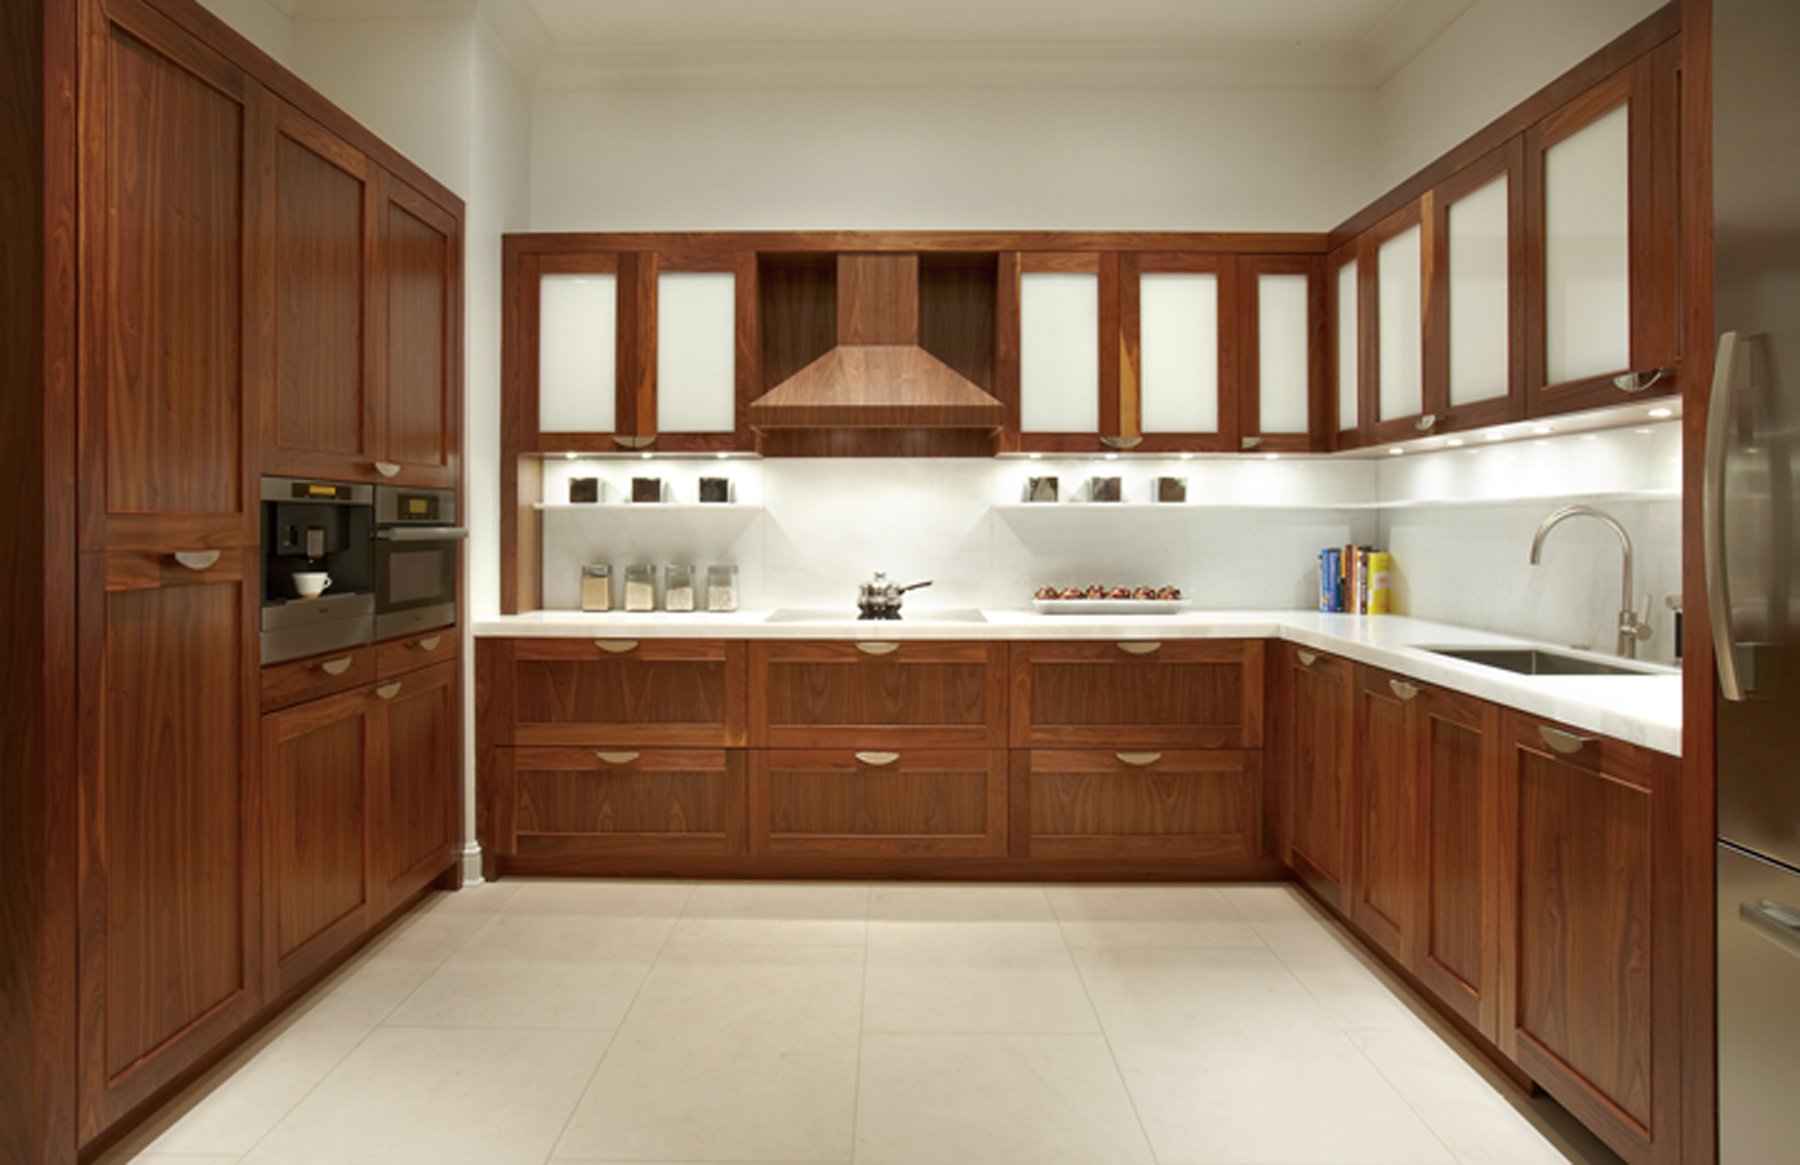 Kitchen Cabinets Guide For Luxury Homes In Pakistan